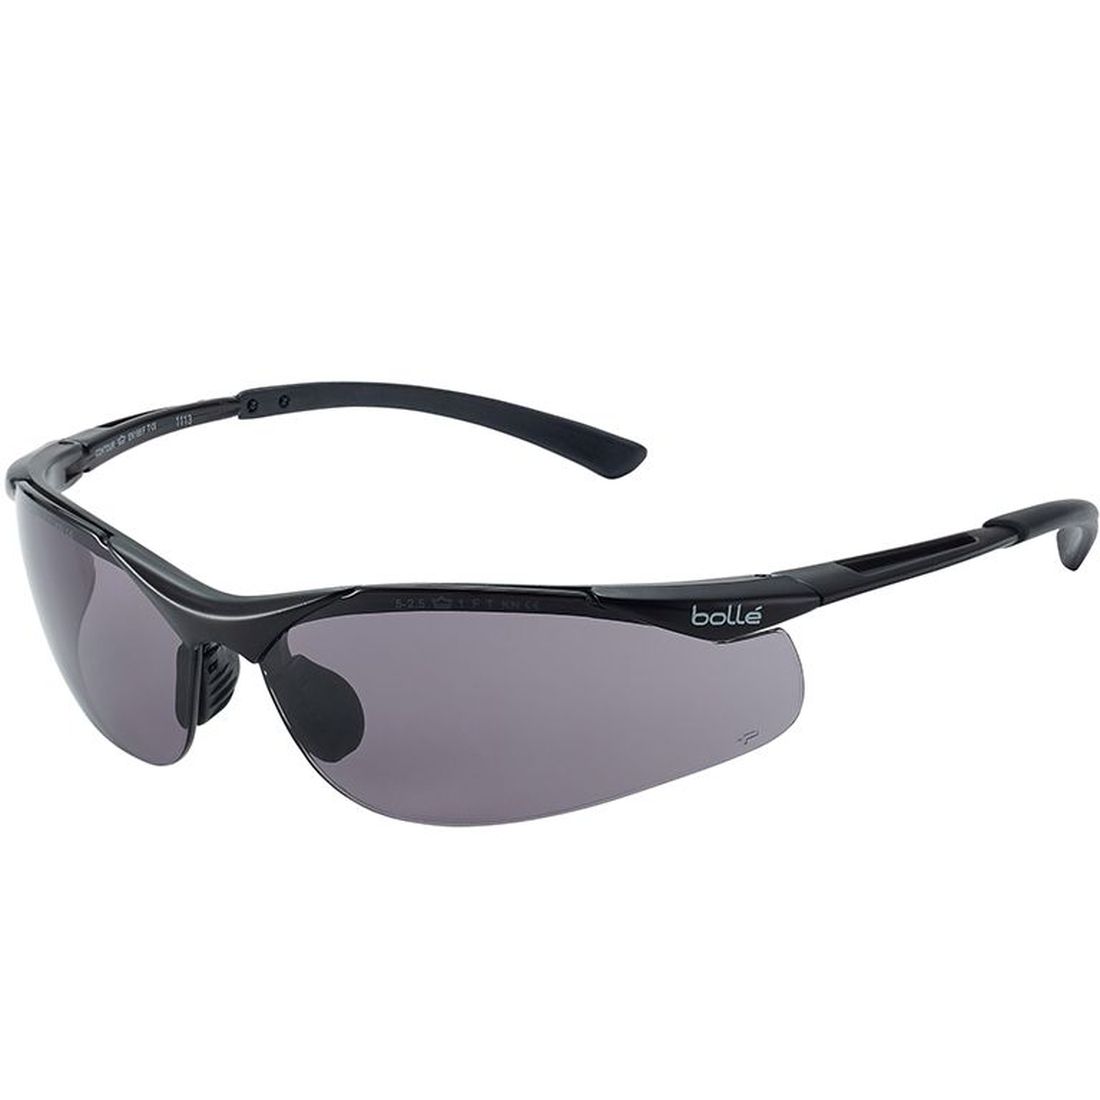 Bolle Safety CONTOUR PLATINUM Safety Glasses - Smoke                                        